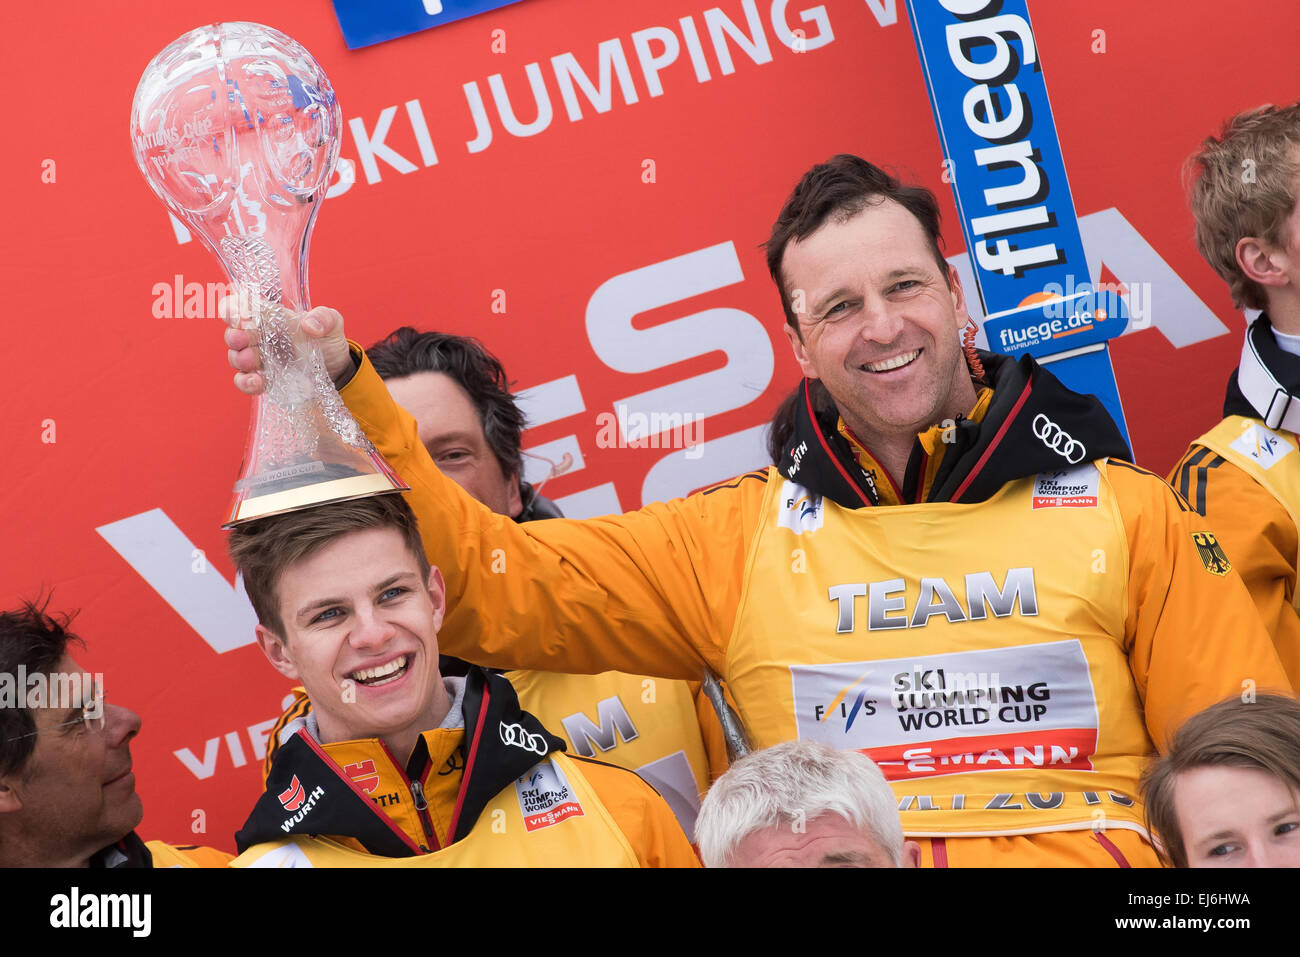 Werner Schuster German Head Coach With The Crystal Globe For Fis in The Most Brilliant and also Gorgeous ski jumping world cup standings regarding Really encourage